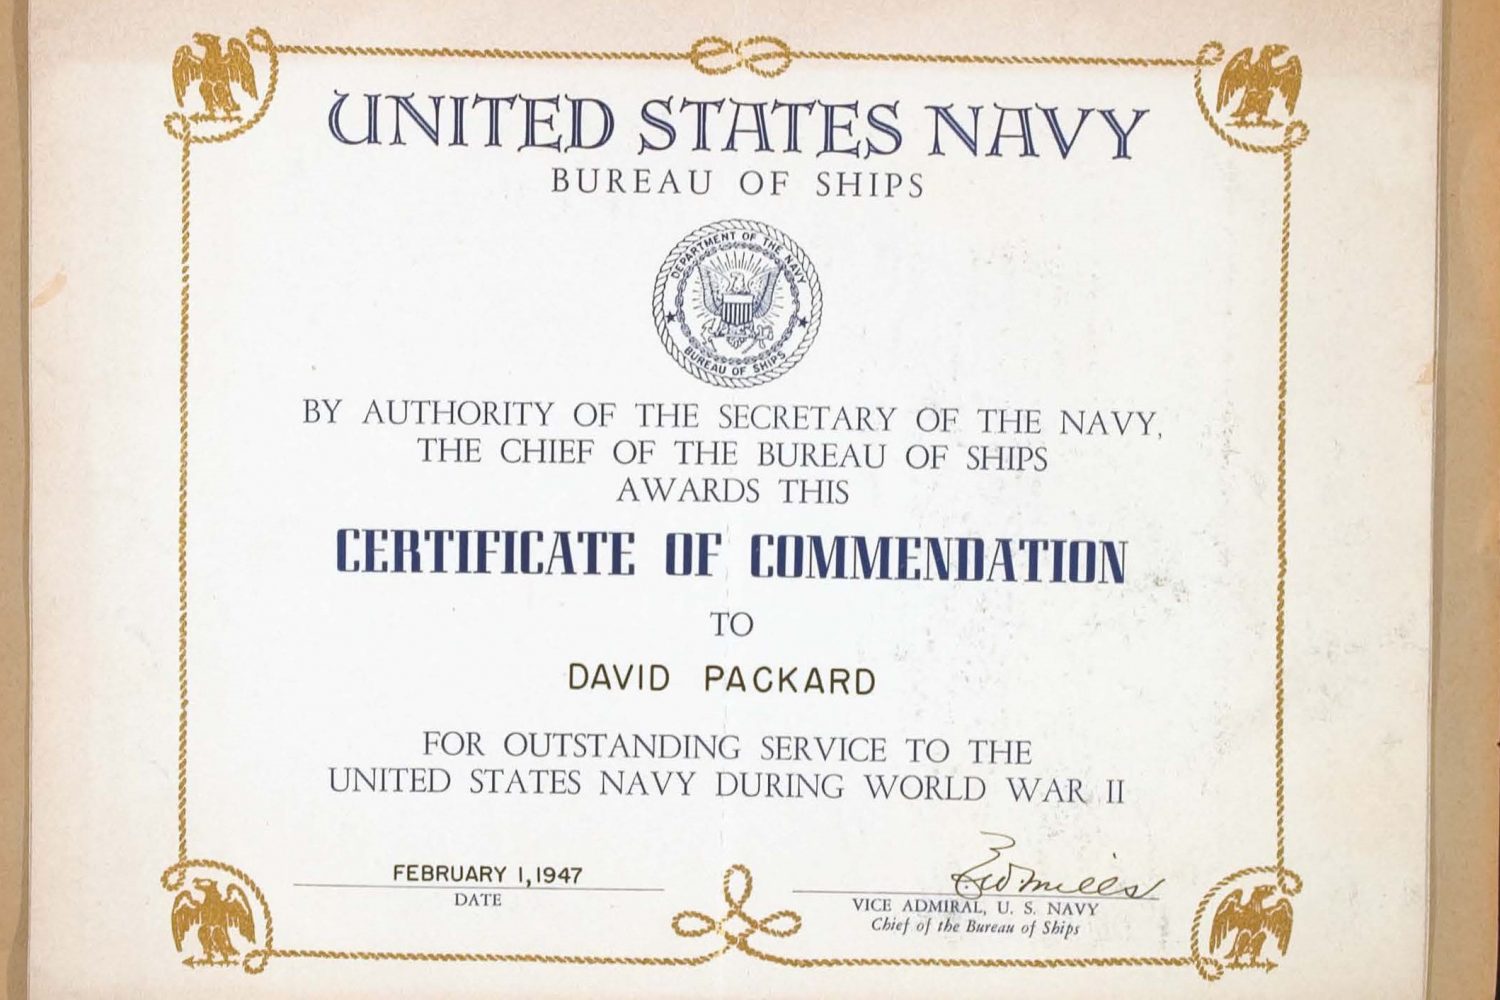 A personalized certificate of commendation given to Dave Packard for his contributions to the Navy during WWII.